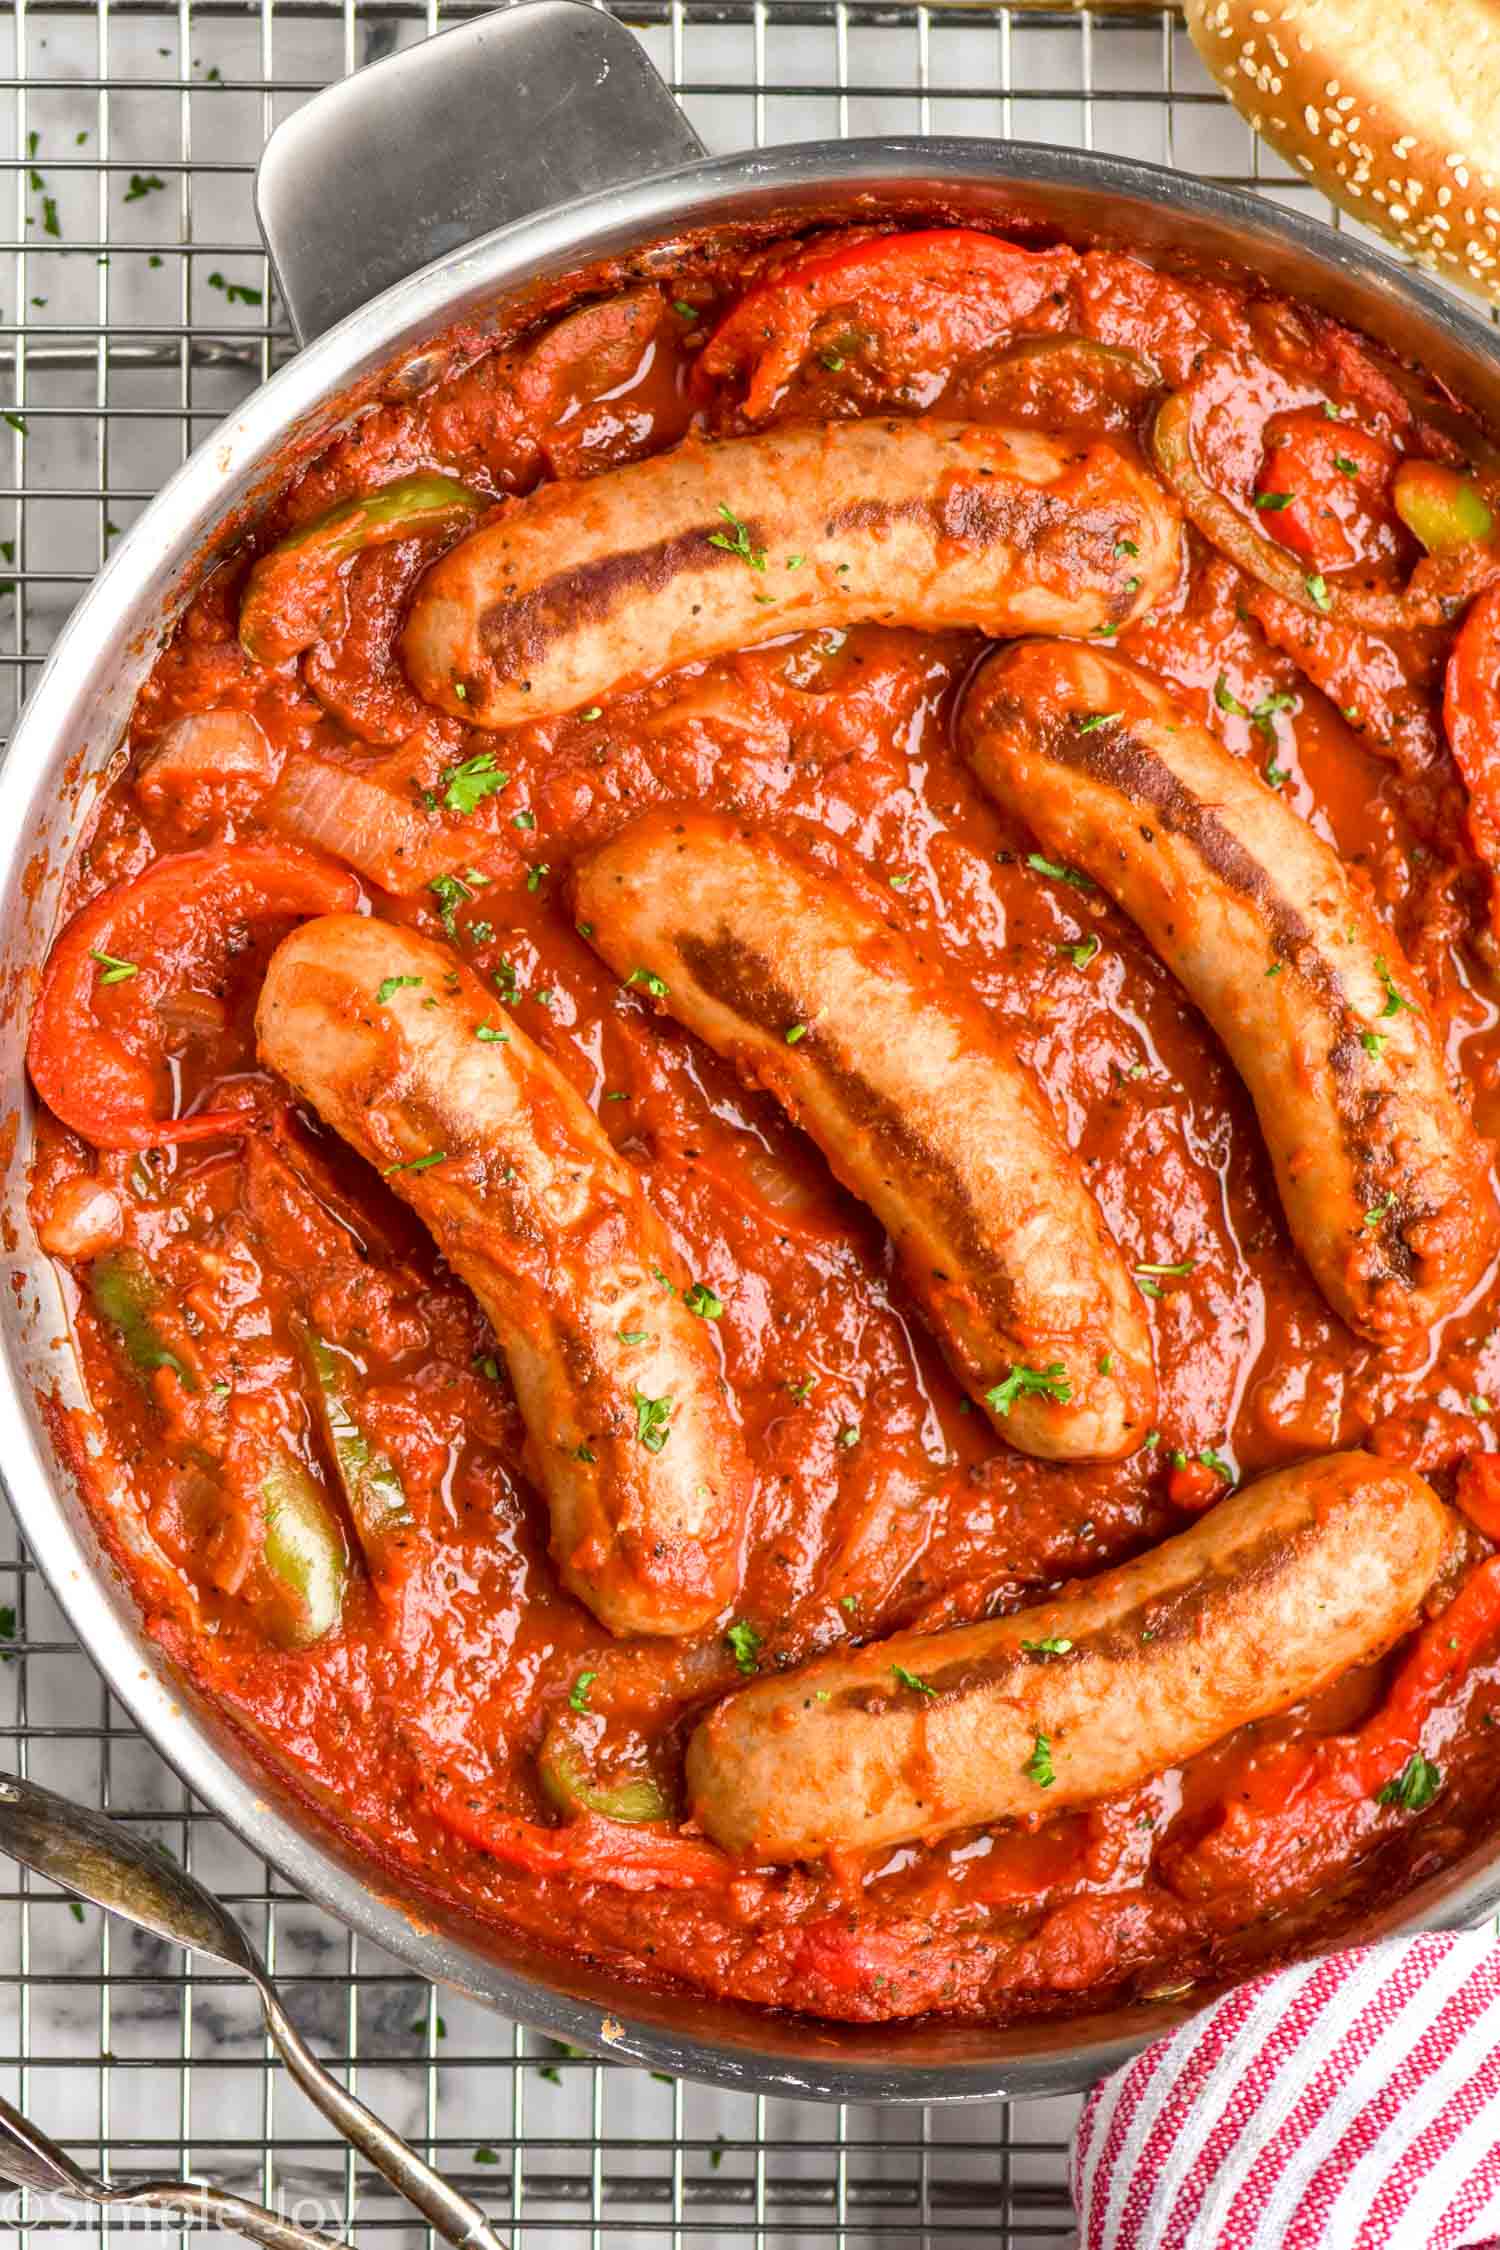 https://www.simplejoy.com/wp-content/uploads/2021/10/sausage-and-peppers.jpg